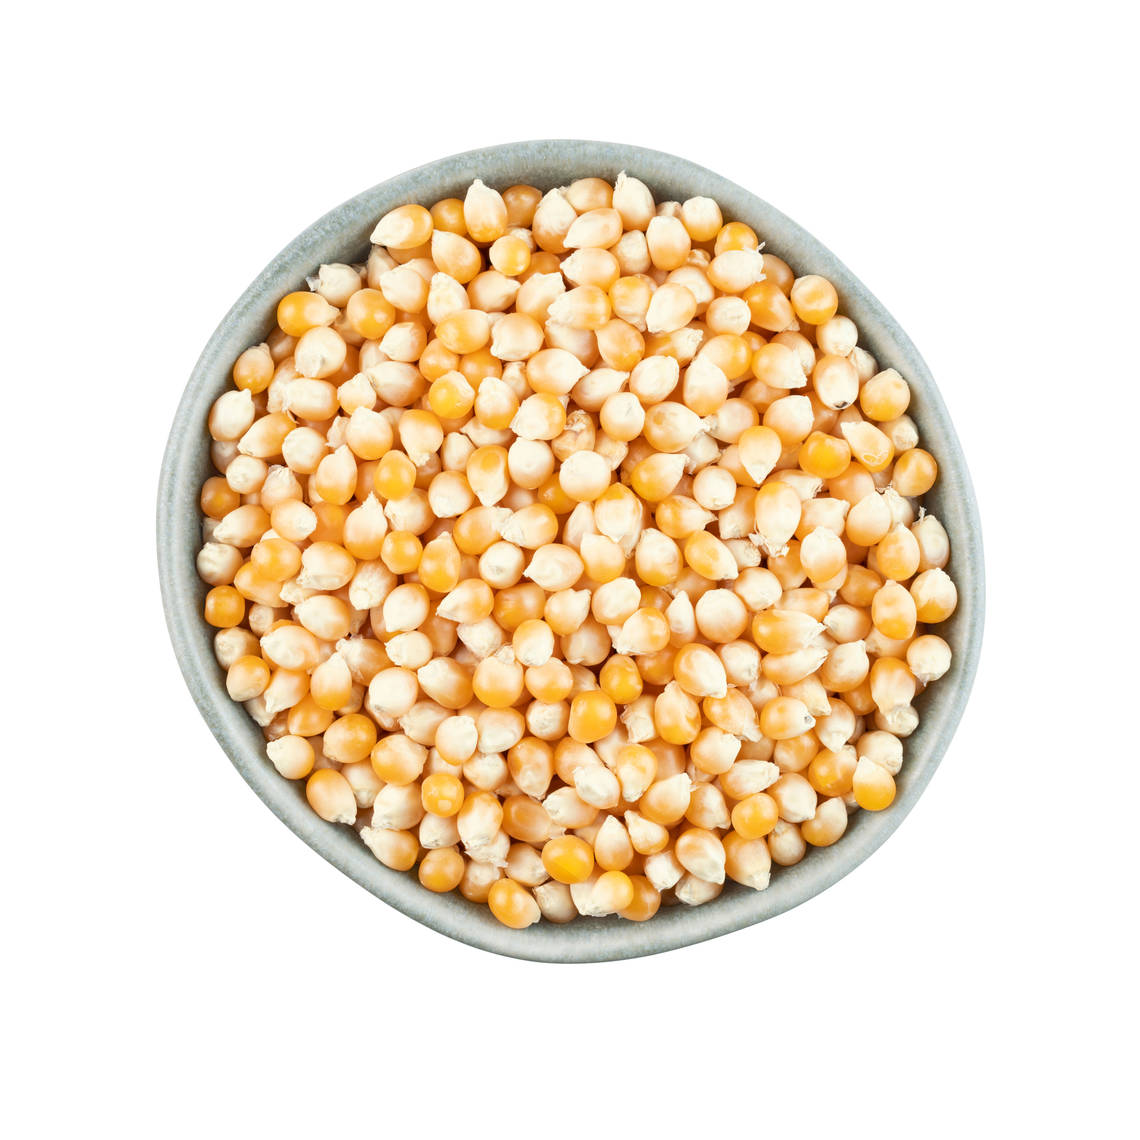 Popcorn is a special kind of flint maize that is specially cultivated as popping corn.